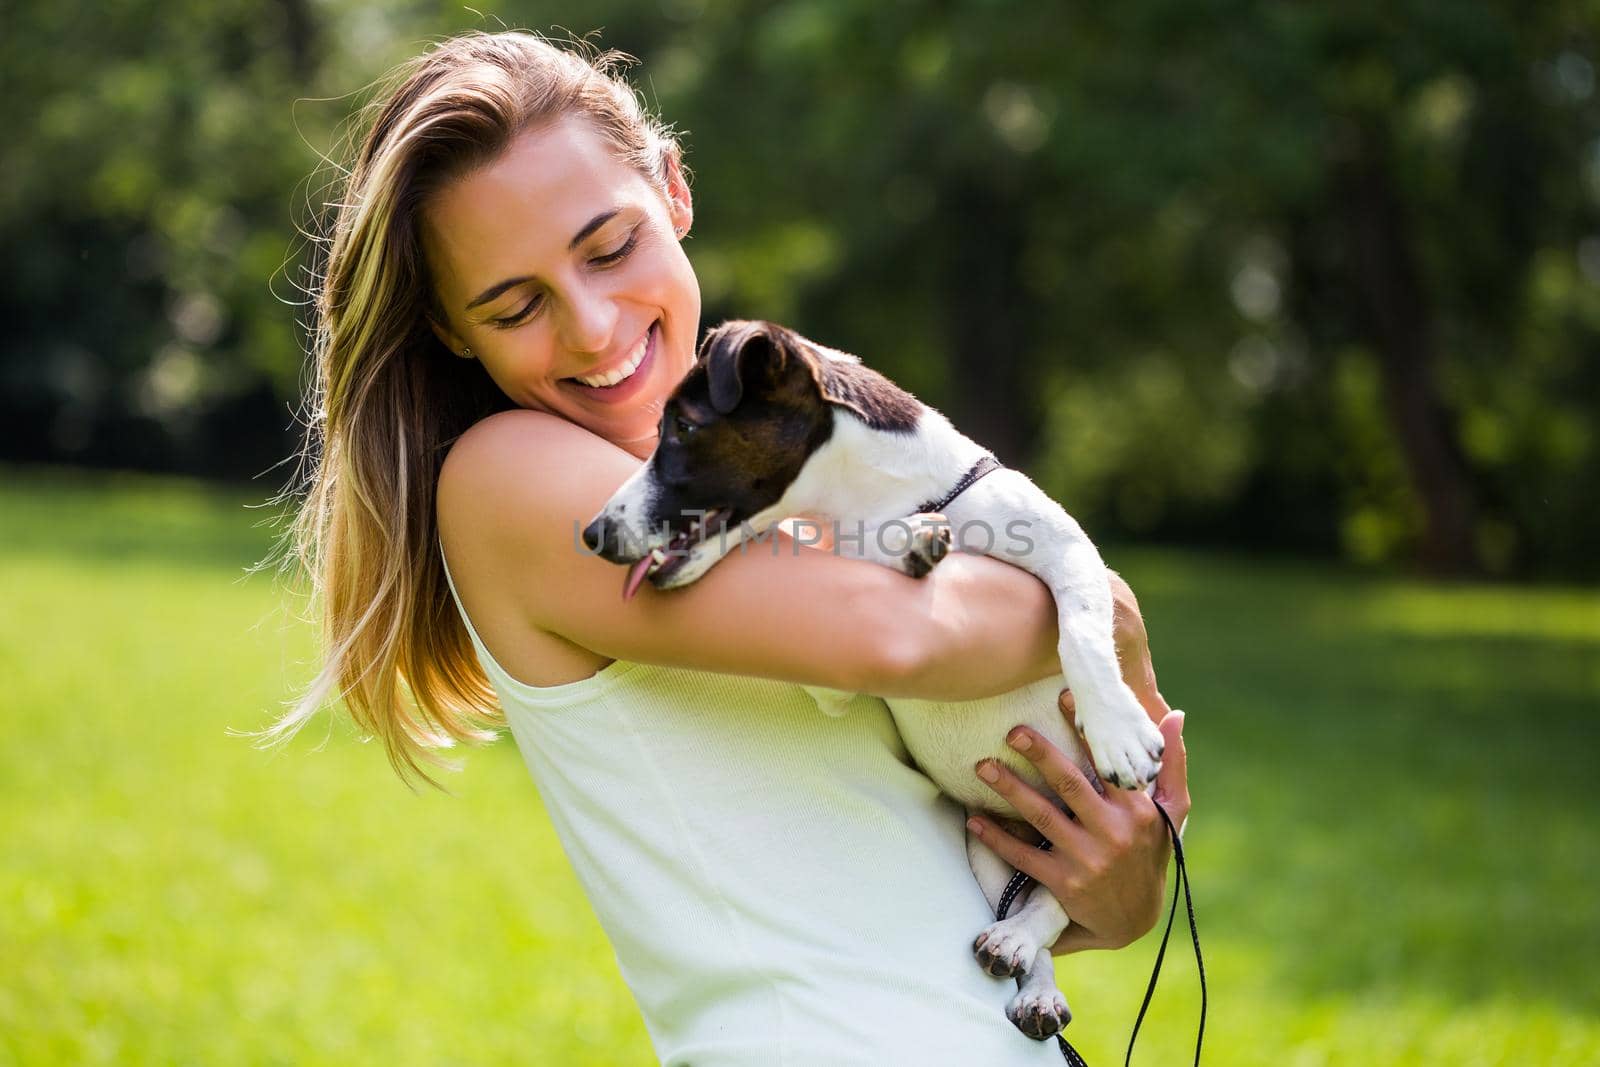 Beautiful woman enjoys spending time in the nature with her cute dog Jack Russell Terrier.